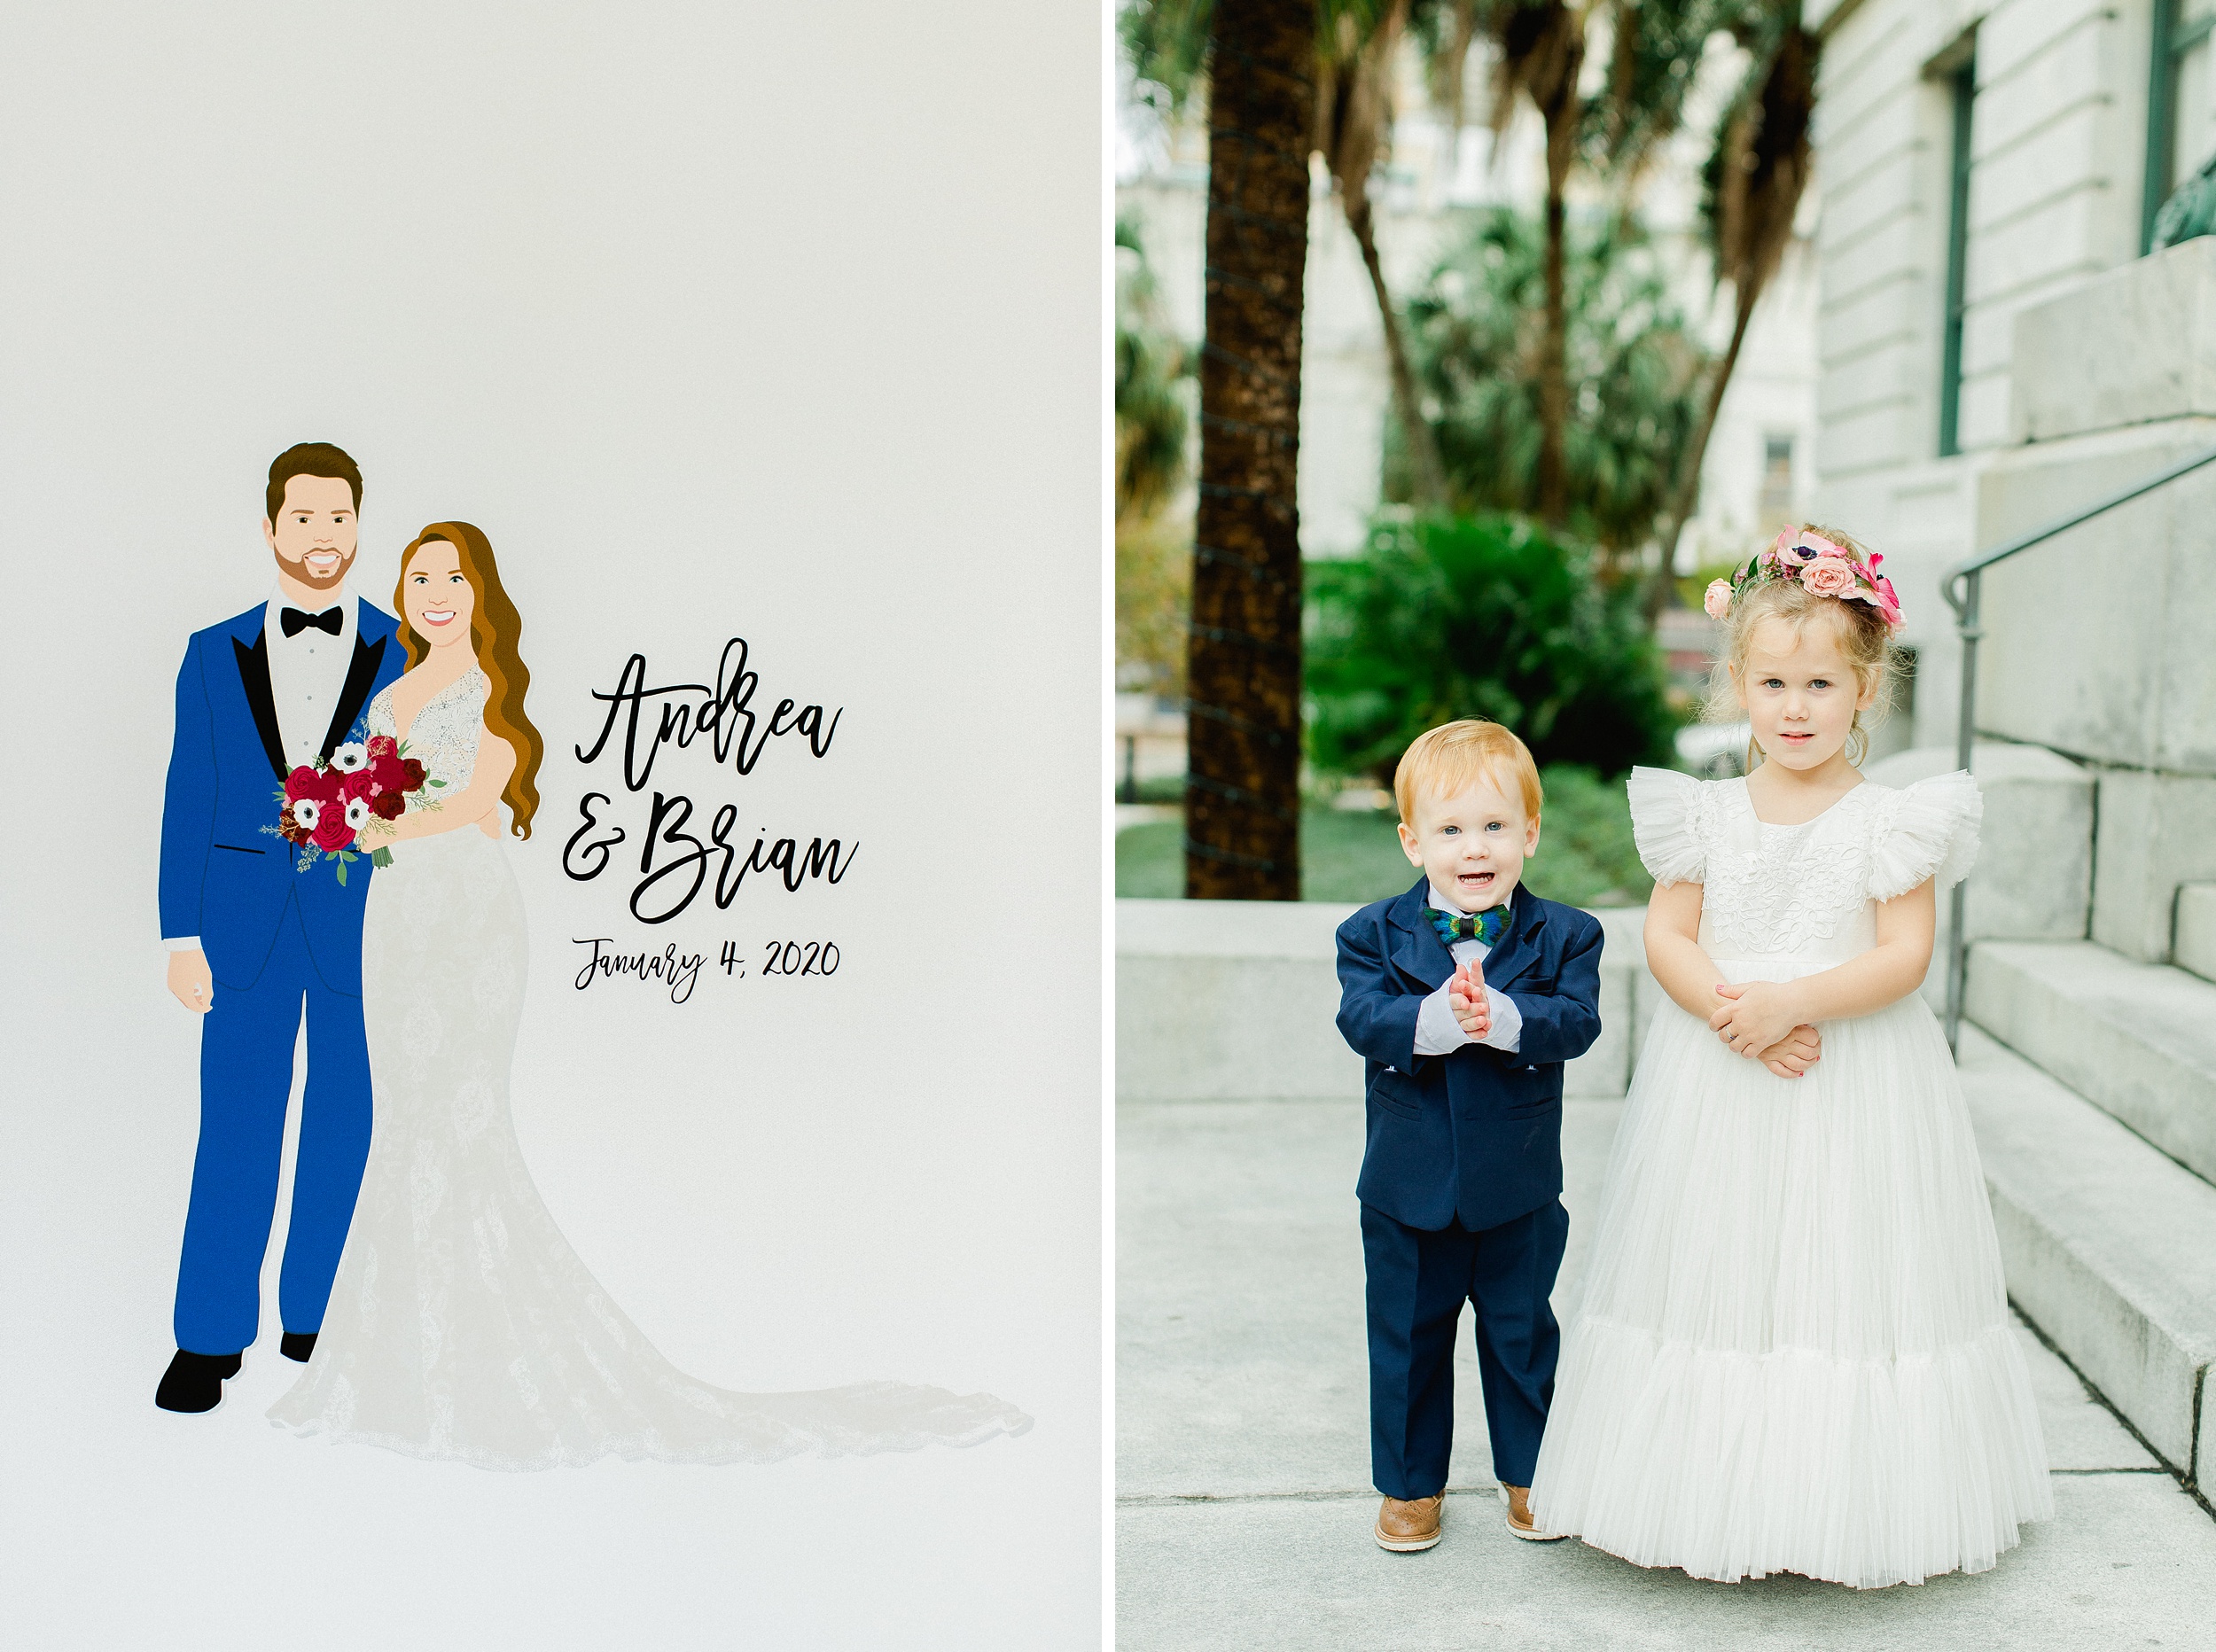 The Vault Tampa Wedding | © Ailyn La Torre Photography 2020